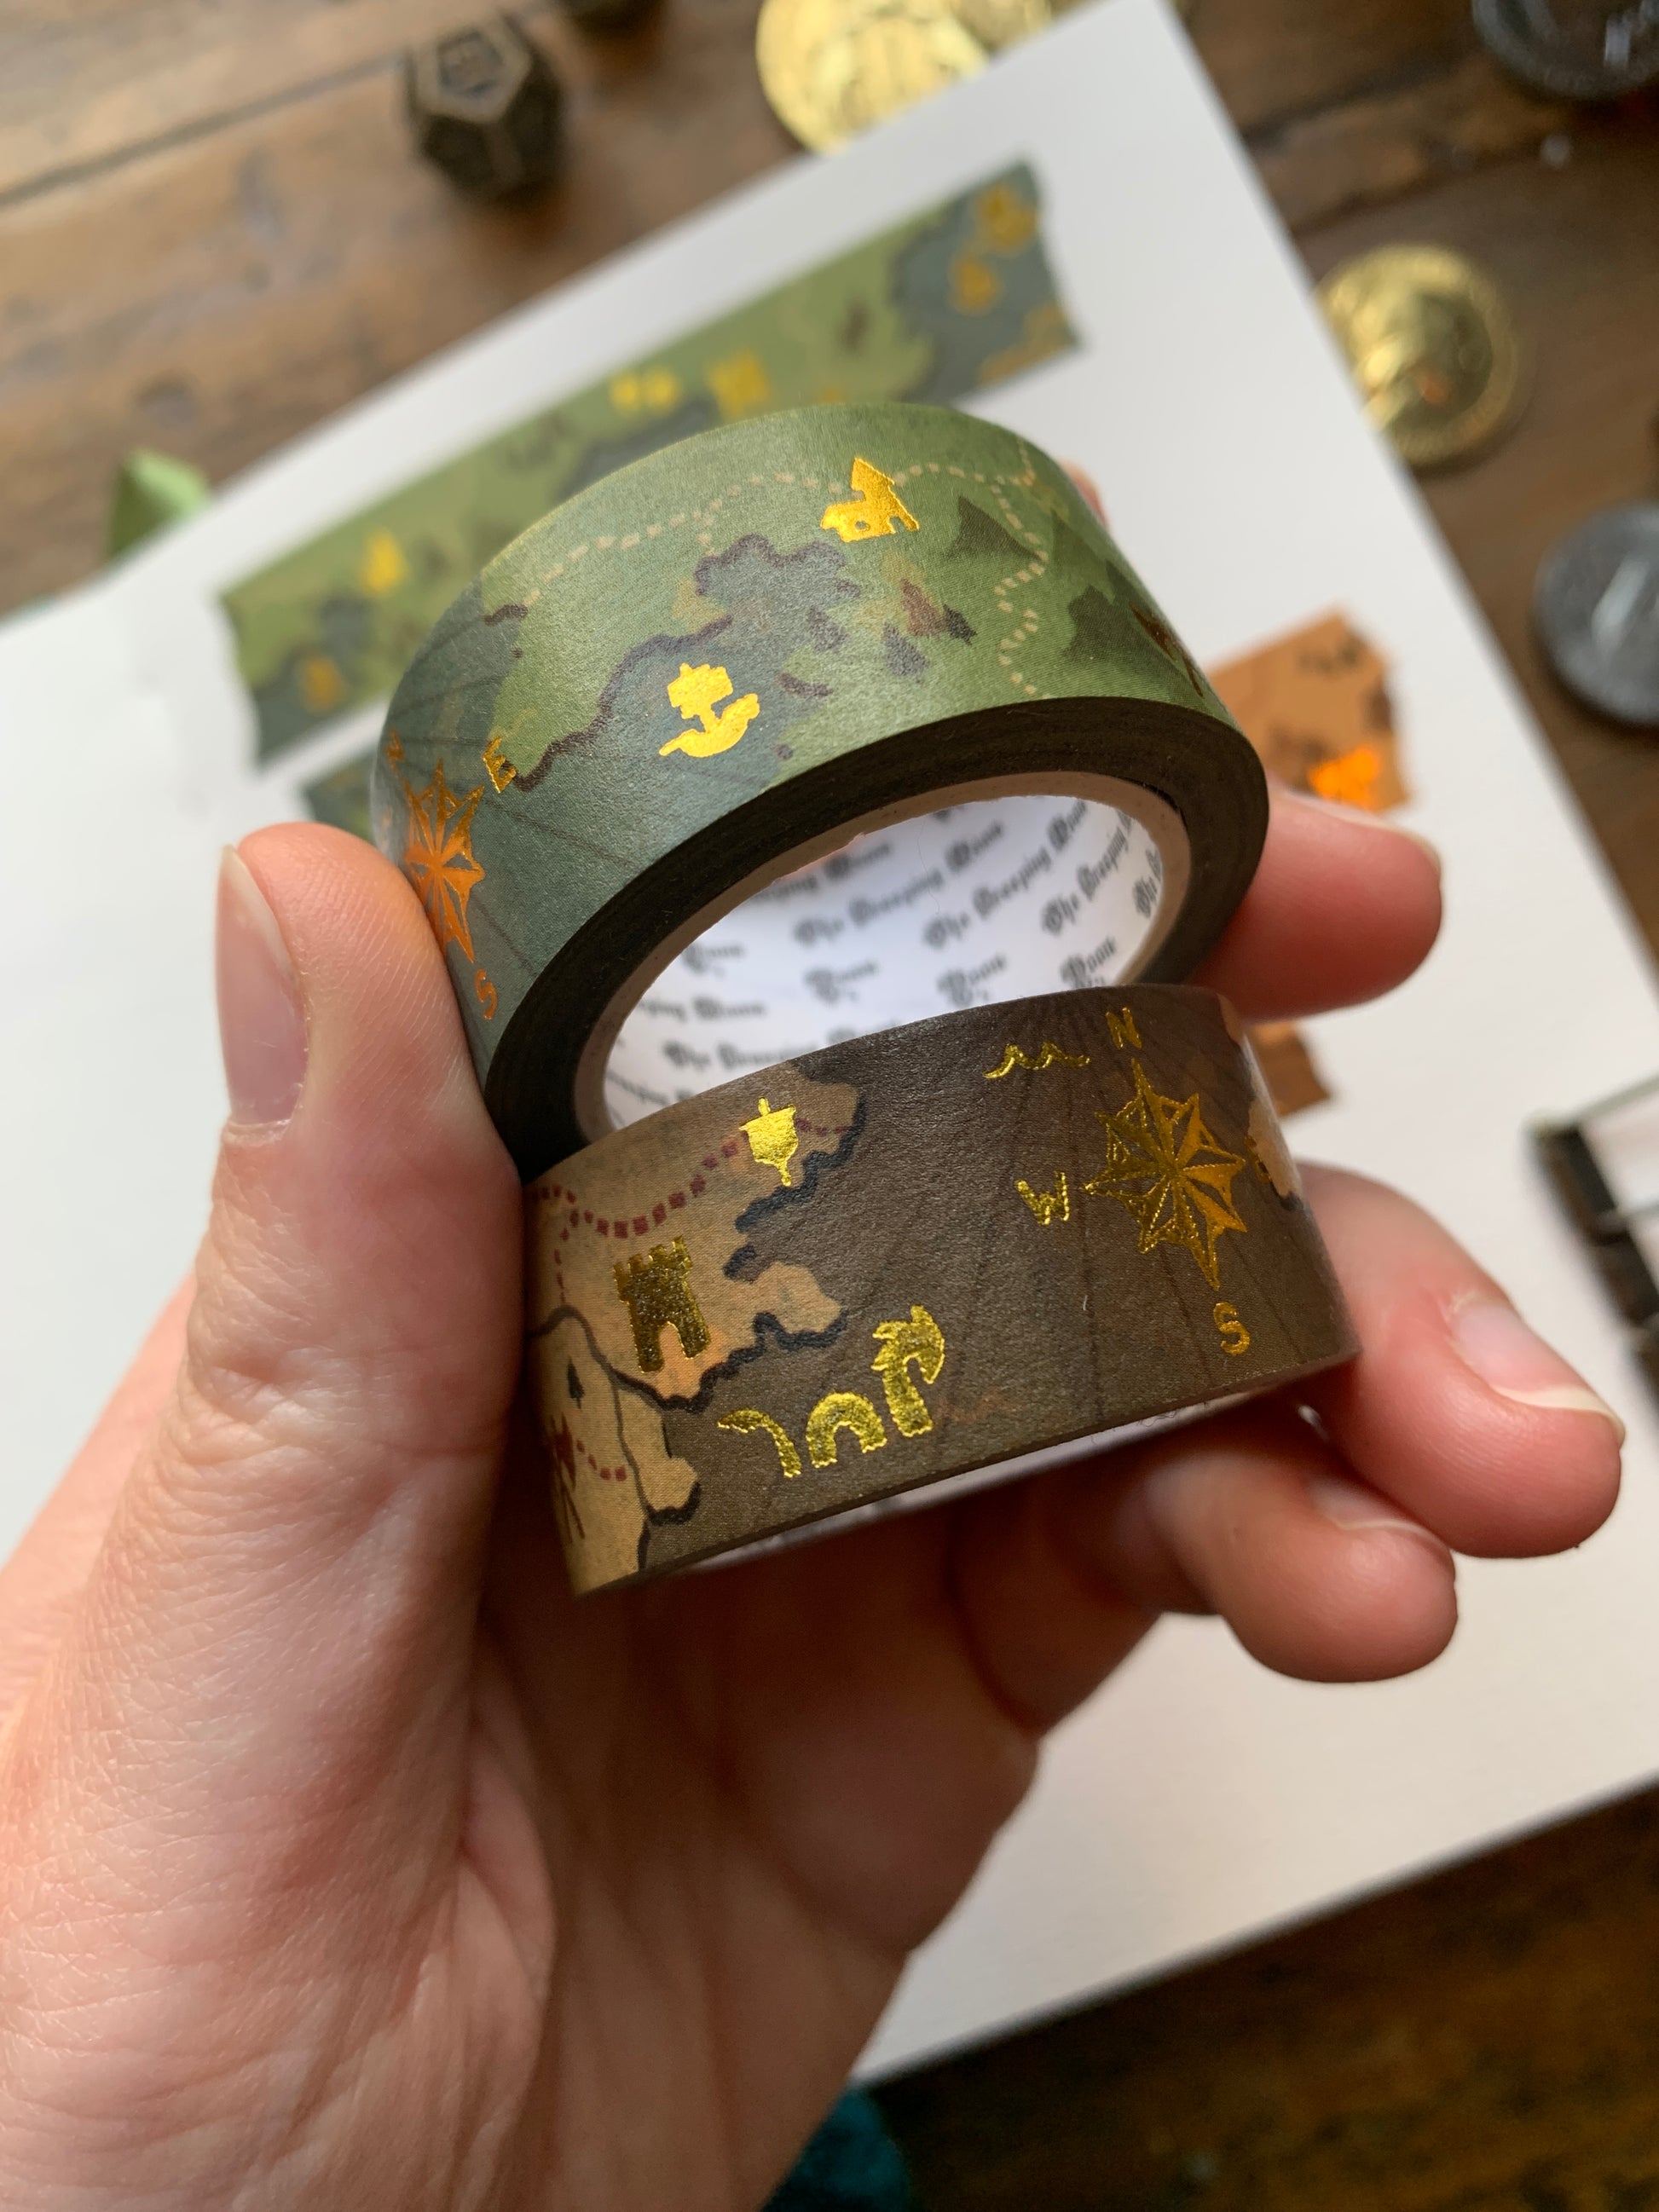 Fantasy maps 20mm gold foil washi tape – The Creeping Moon